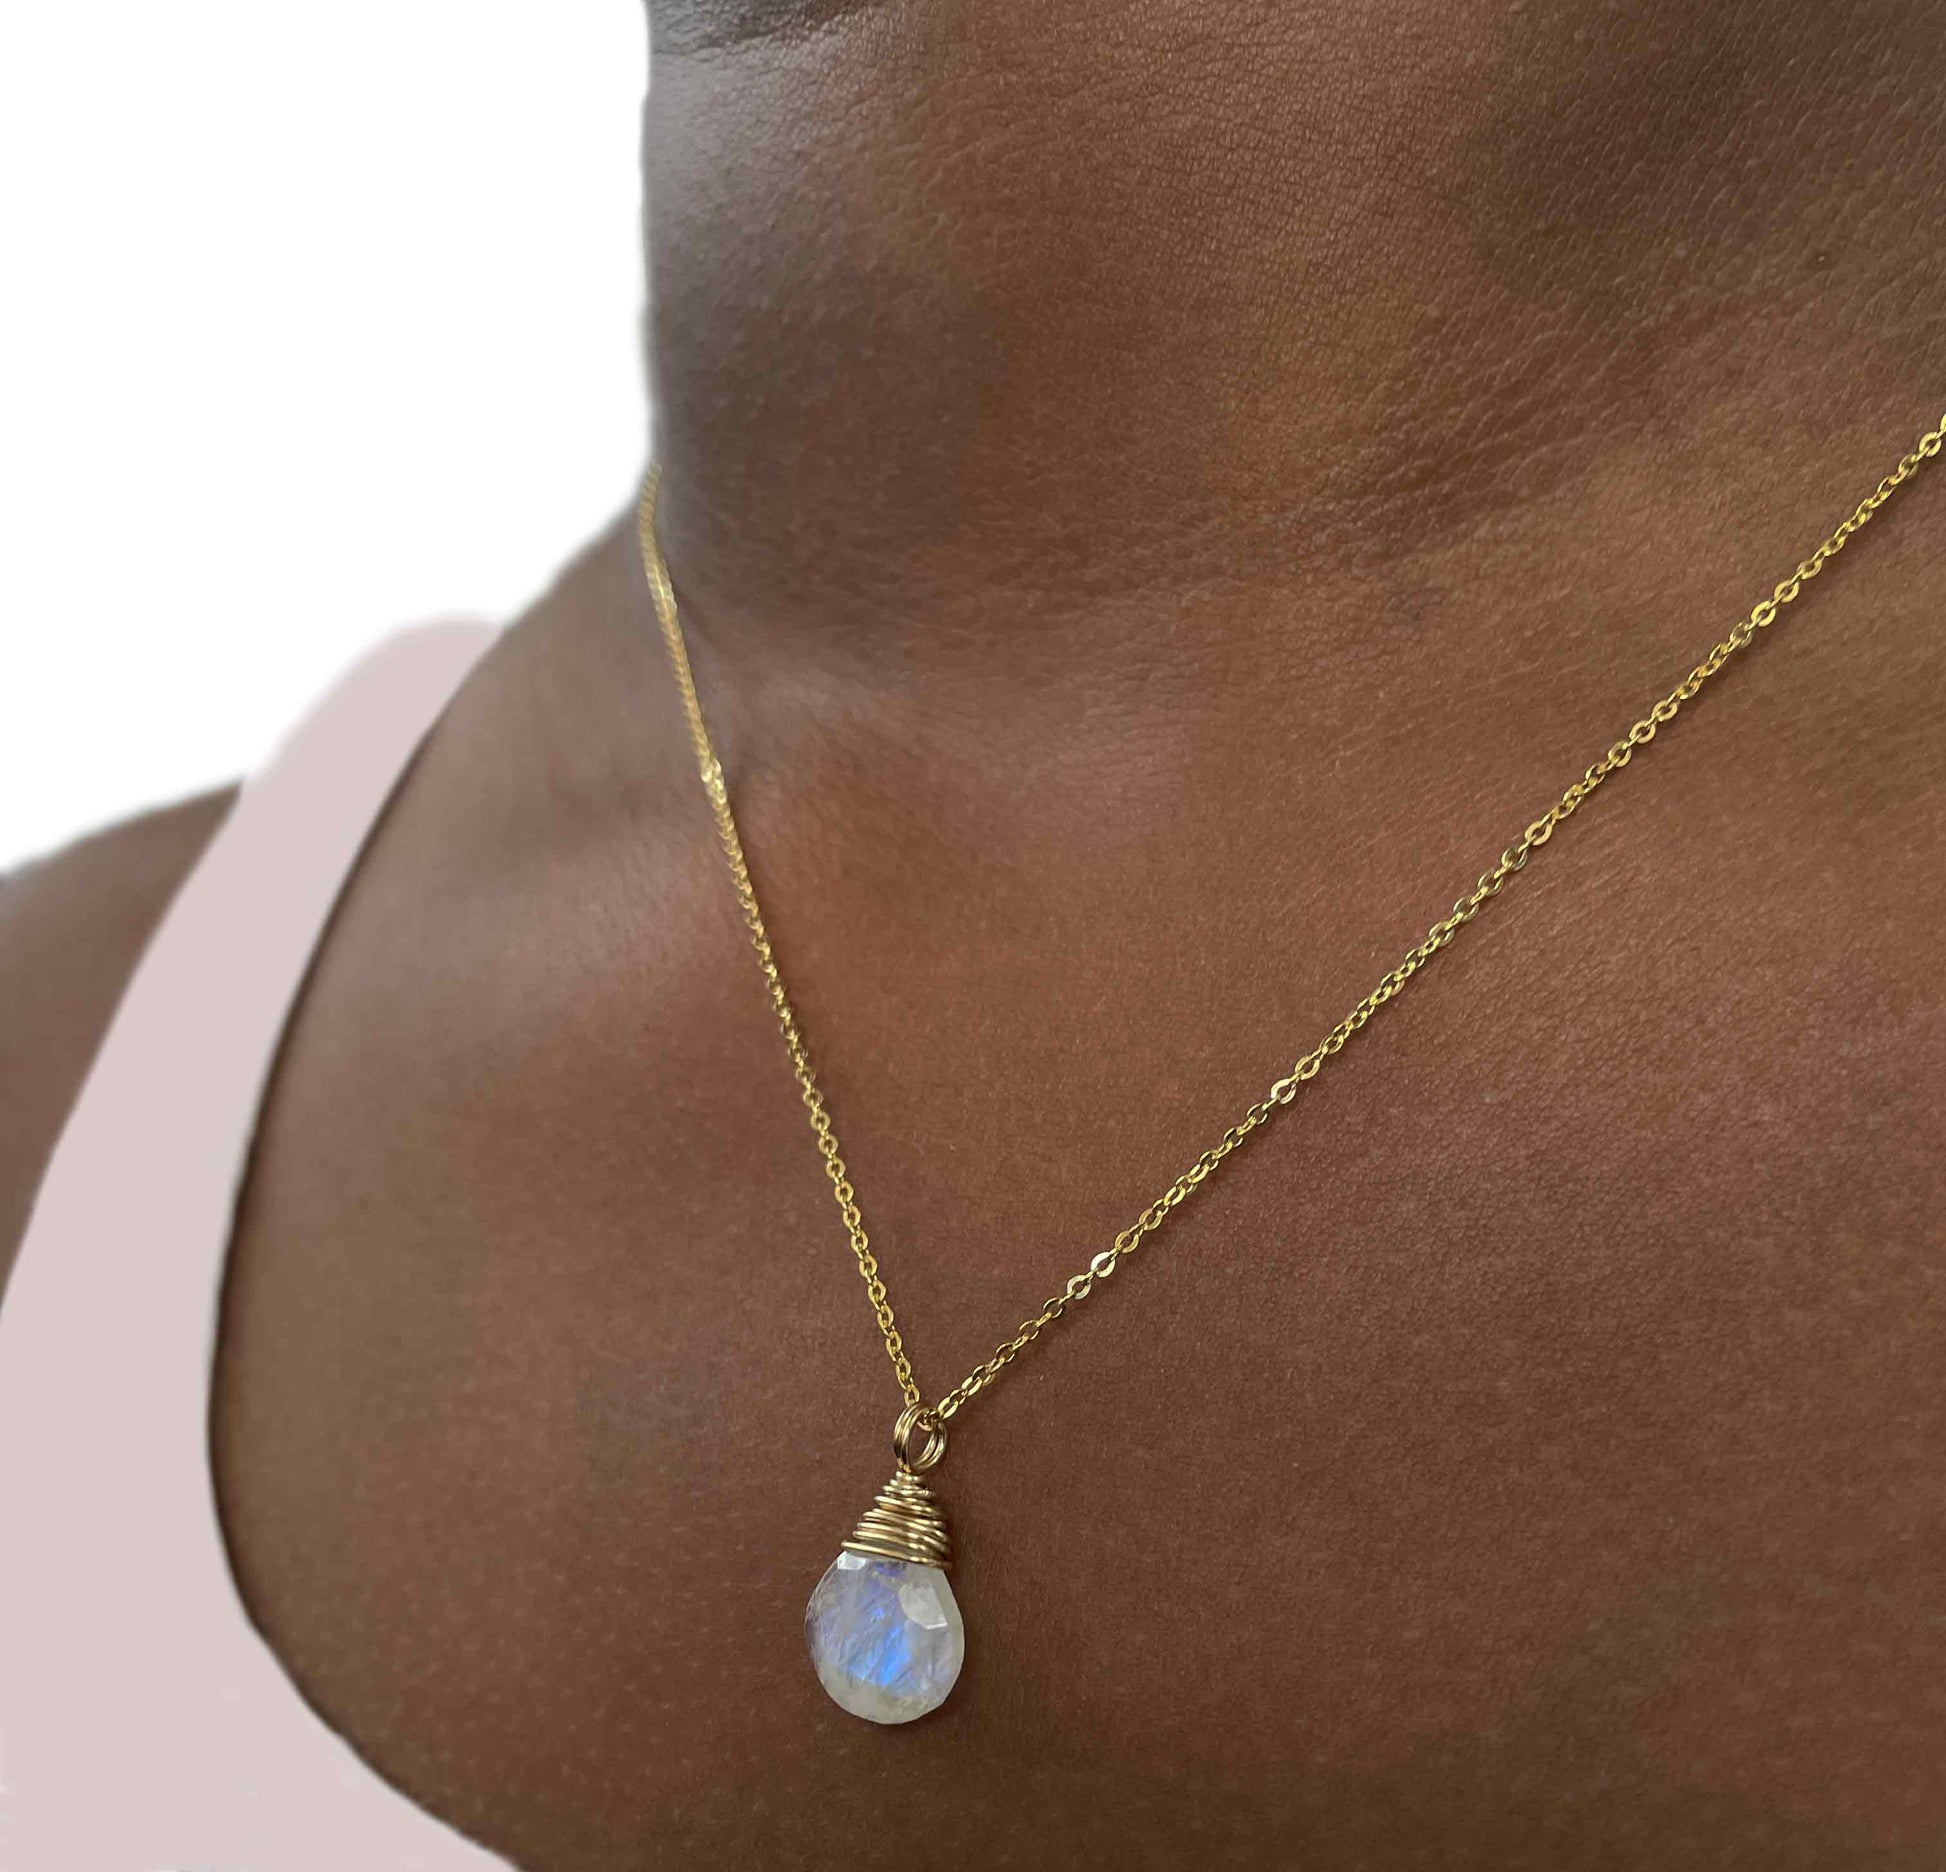 Wrapped Moonstone Necklace | Natural gemstone collection